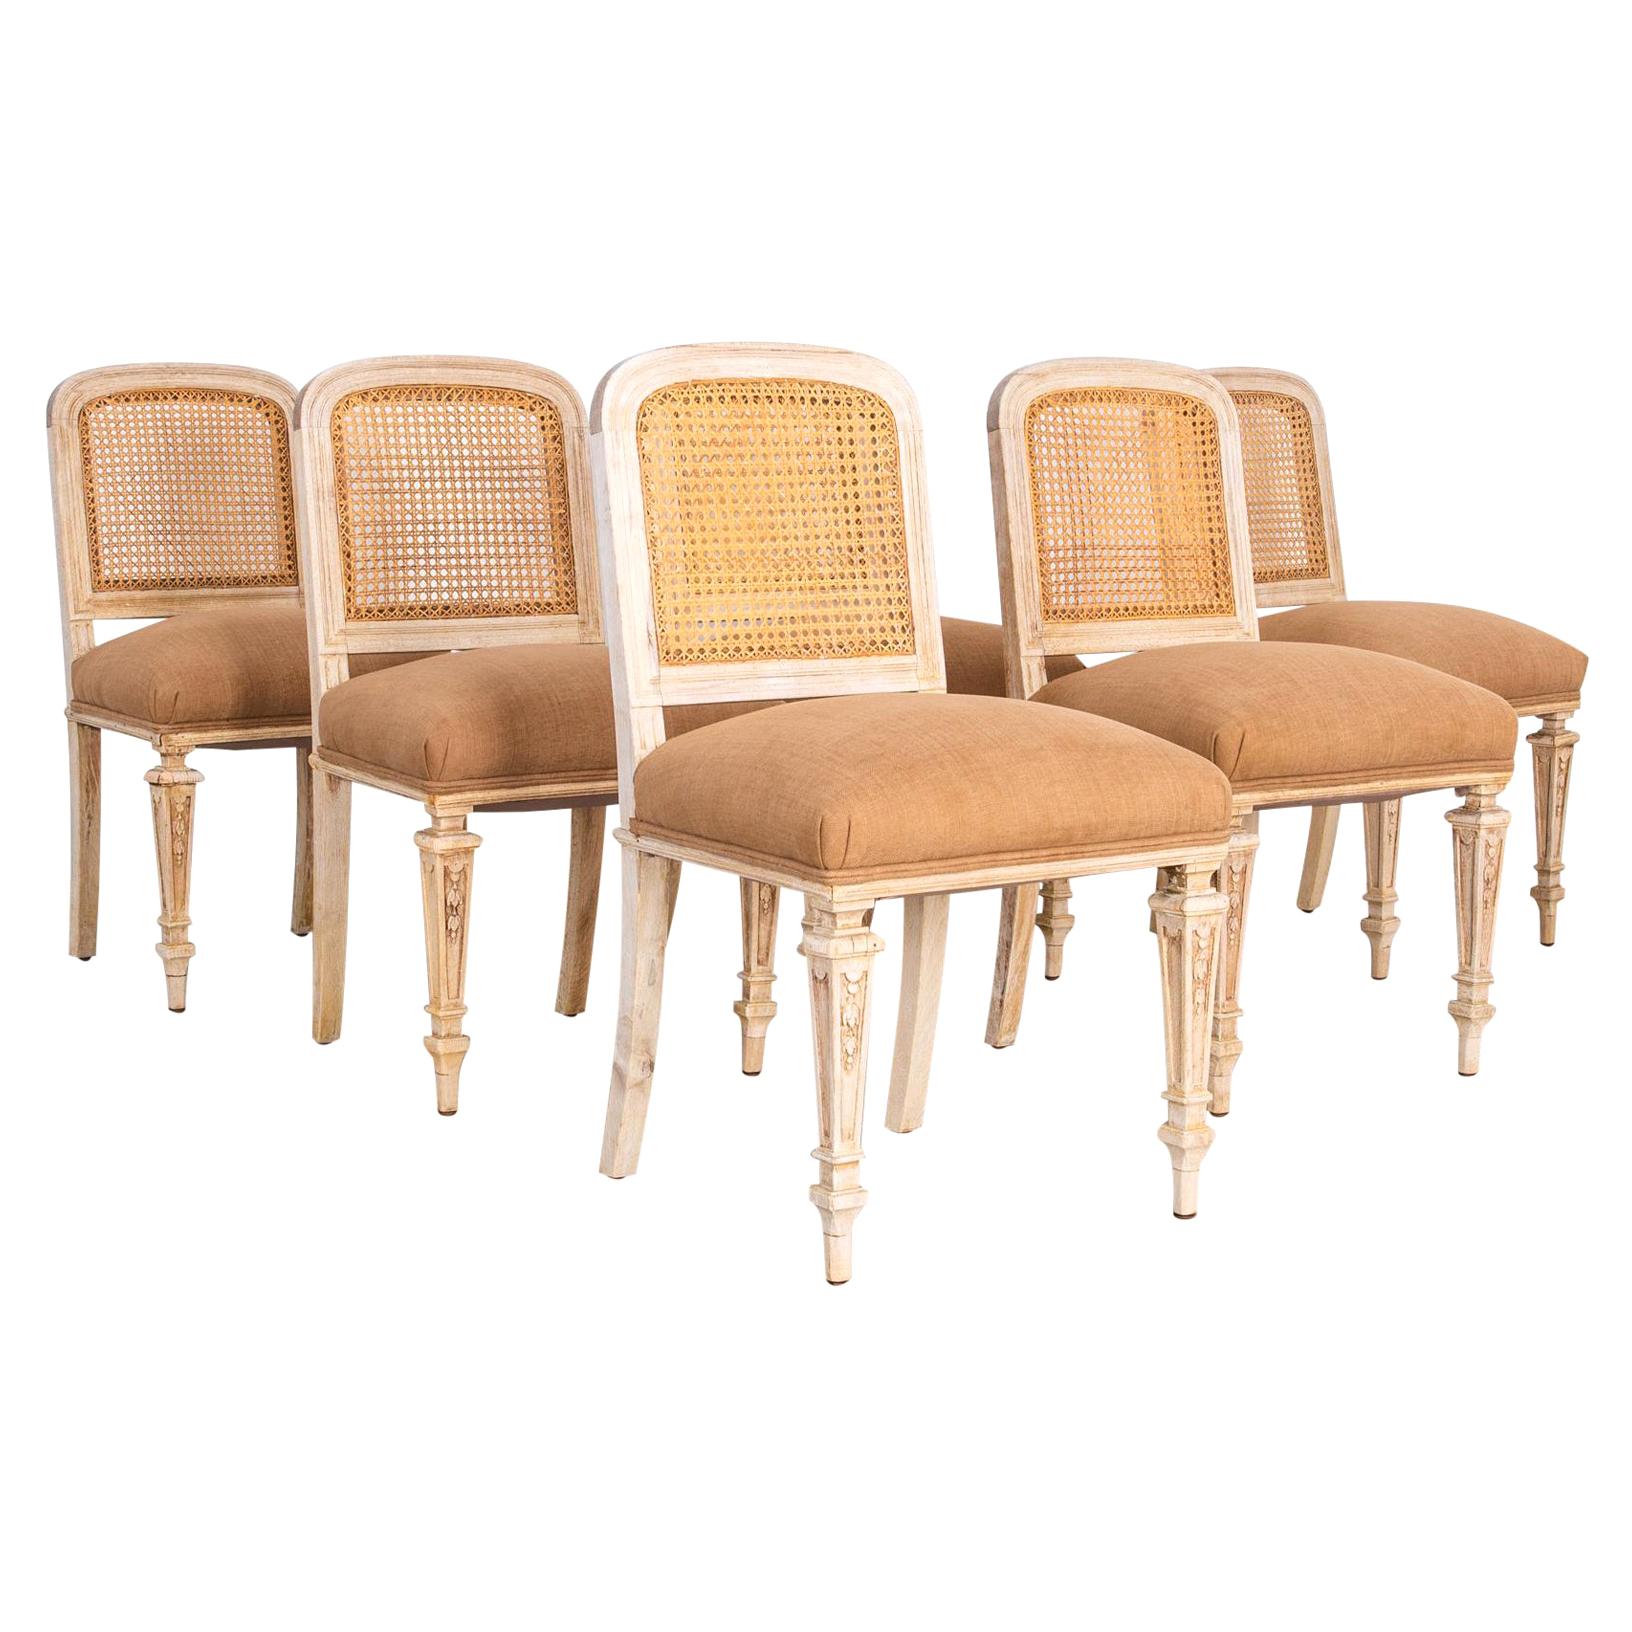 1910s French Dining Chairs, Set of 6